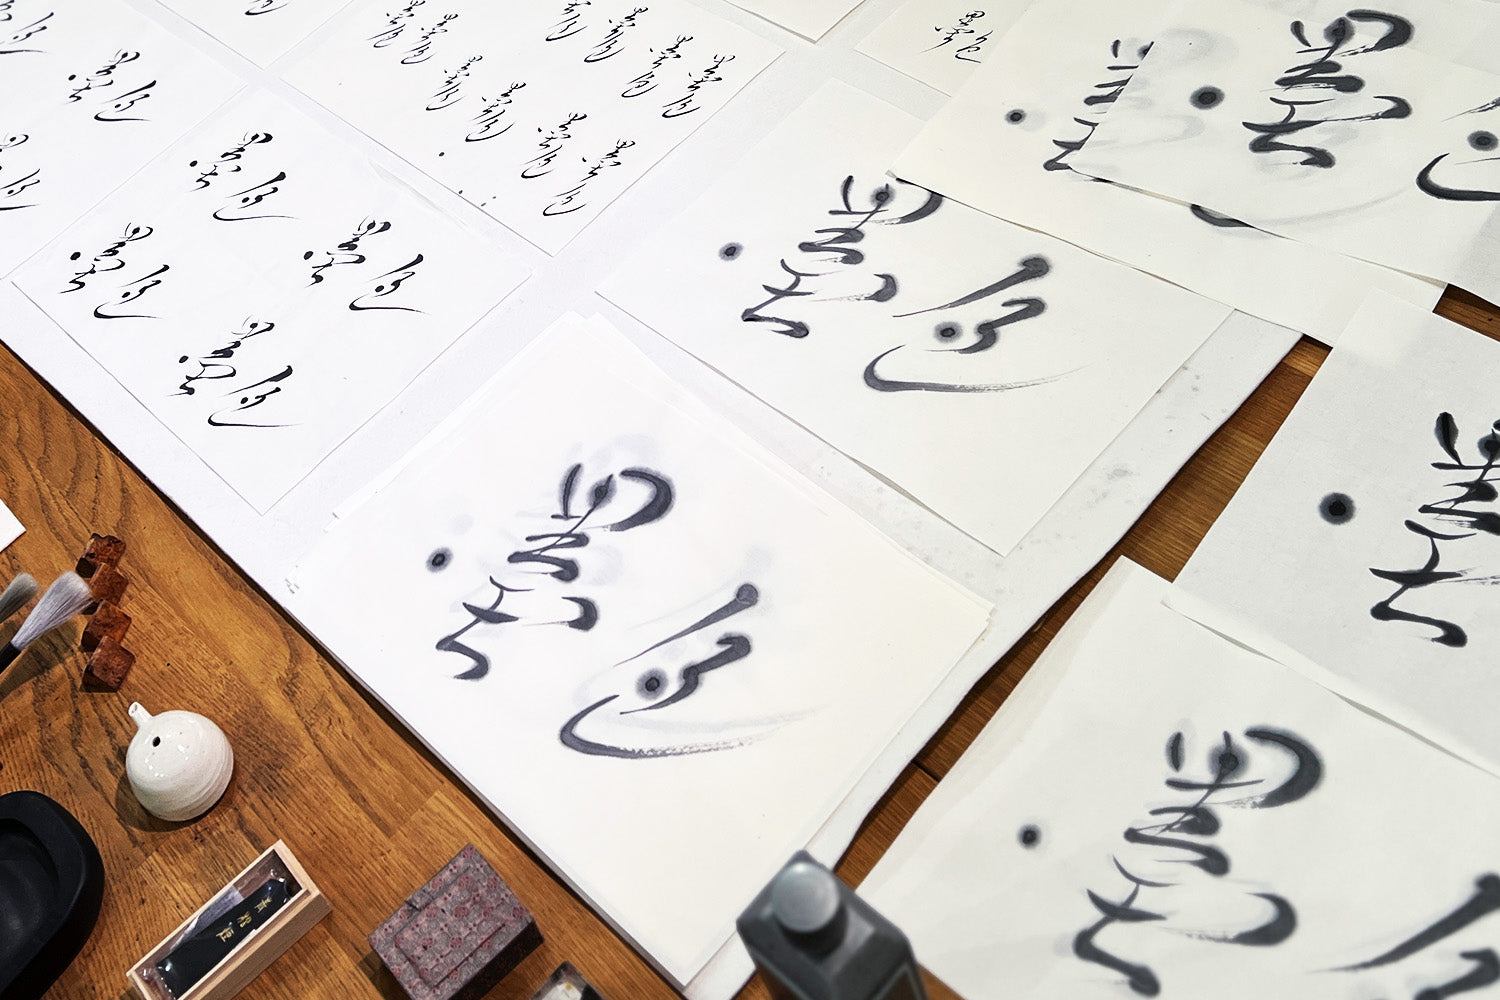 Rows of the words “sumi iro,” or “the color of sumi,” line a worktable in calligrapher Aoi Yamaguchi’s studio.